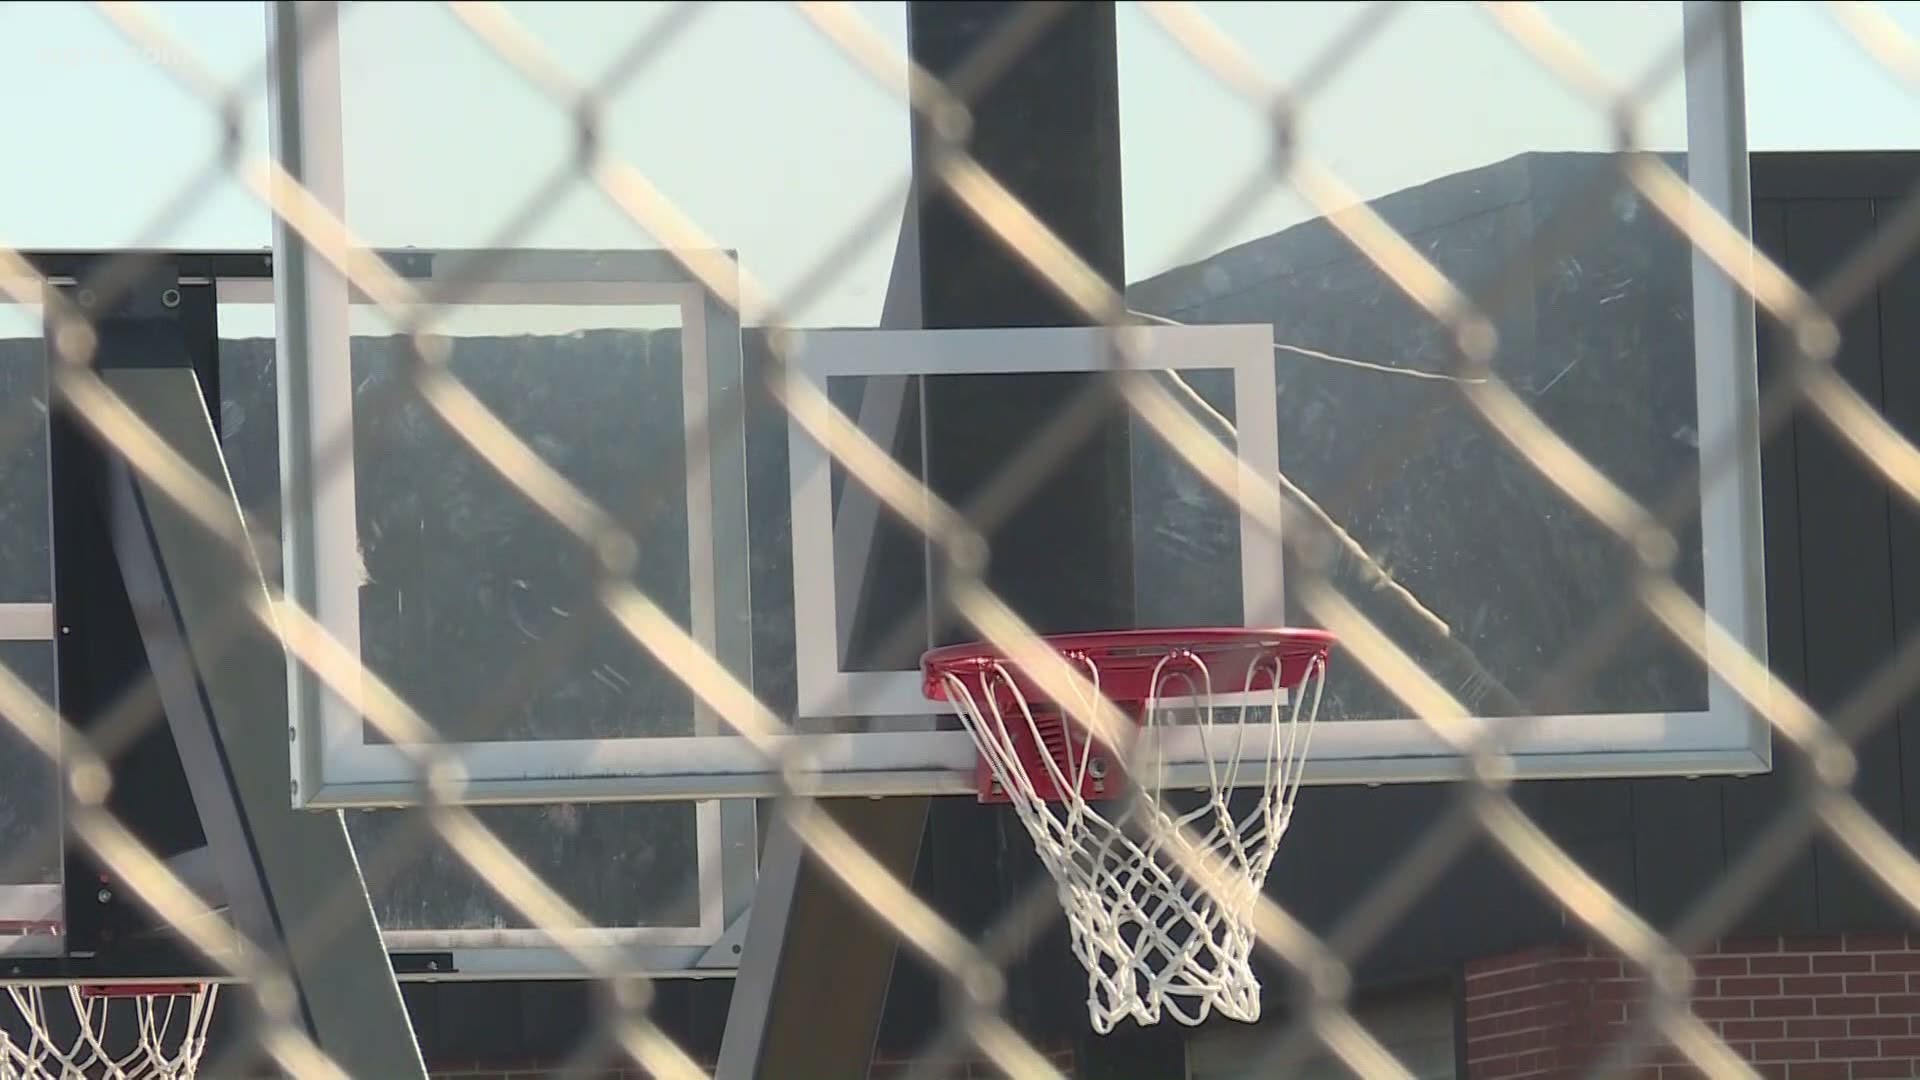 One outdoor activity many like to enjoy in a normal year is basketball. And in Lancaster, two of the town's public courts had remained open, until now.